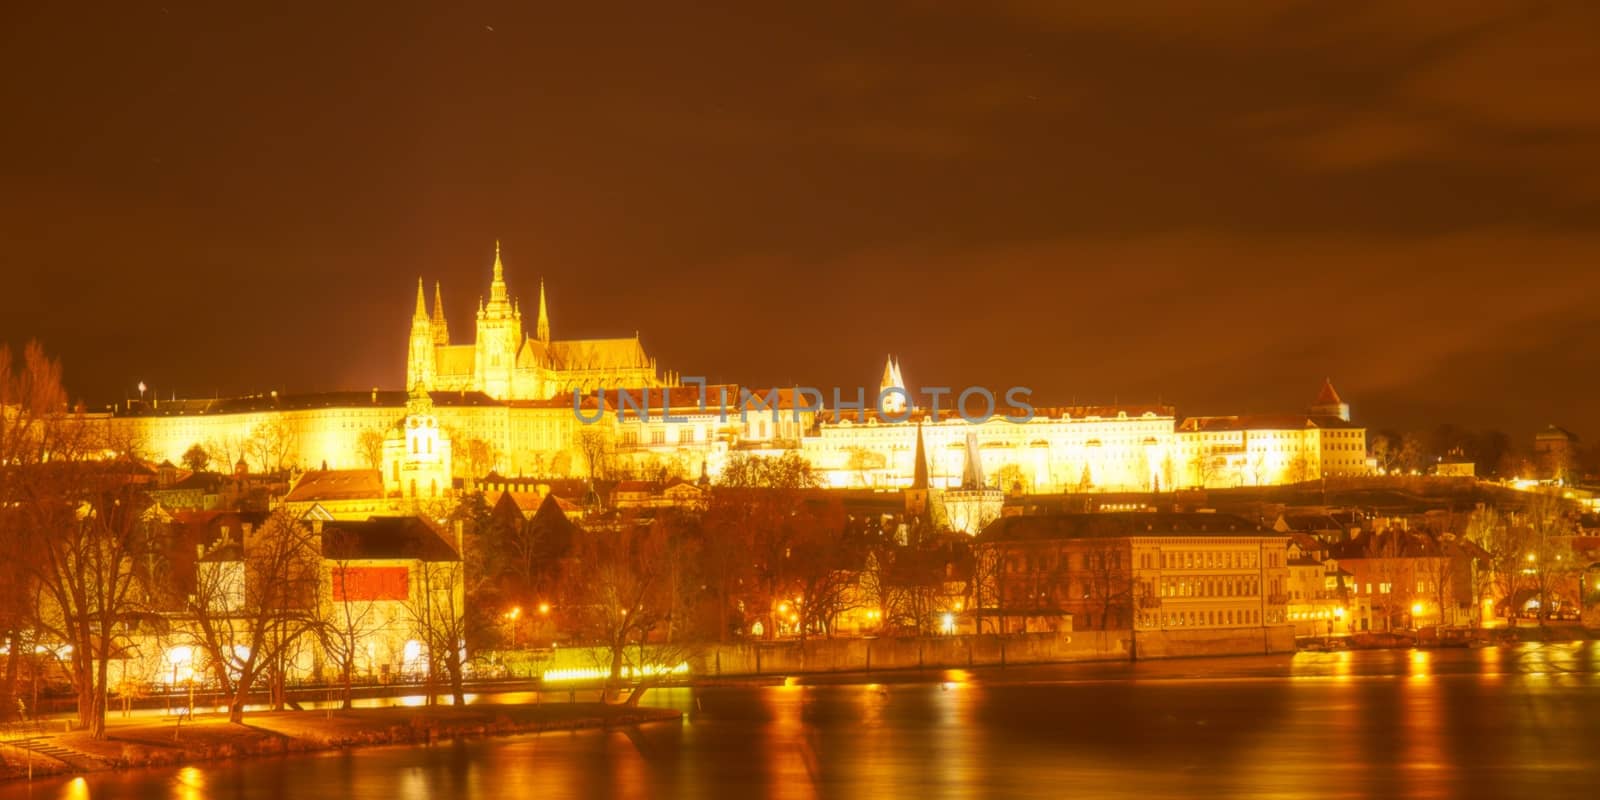 Night view of historical Prague with the Prague castle and Charles bridge by Jindrich_Blecha